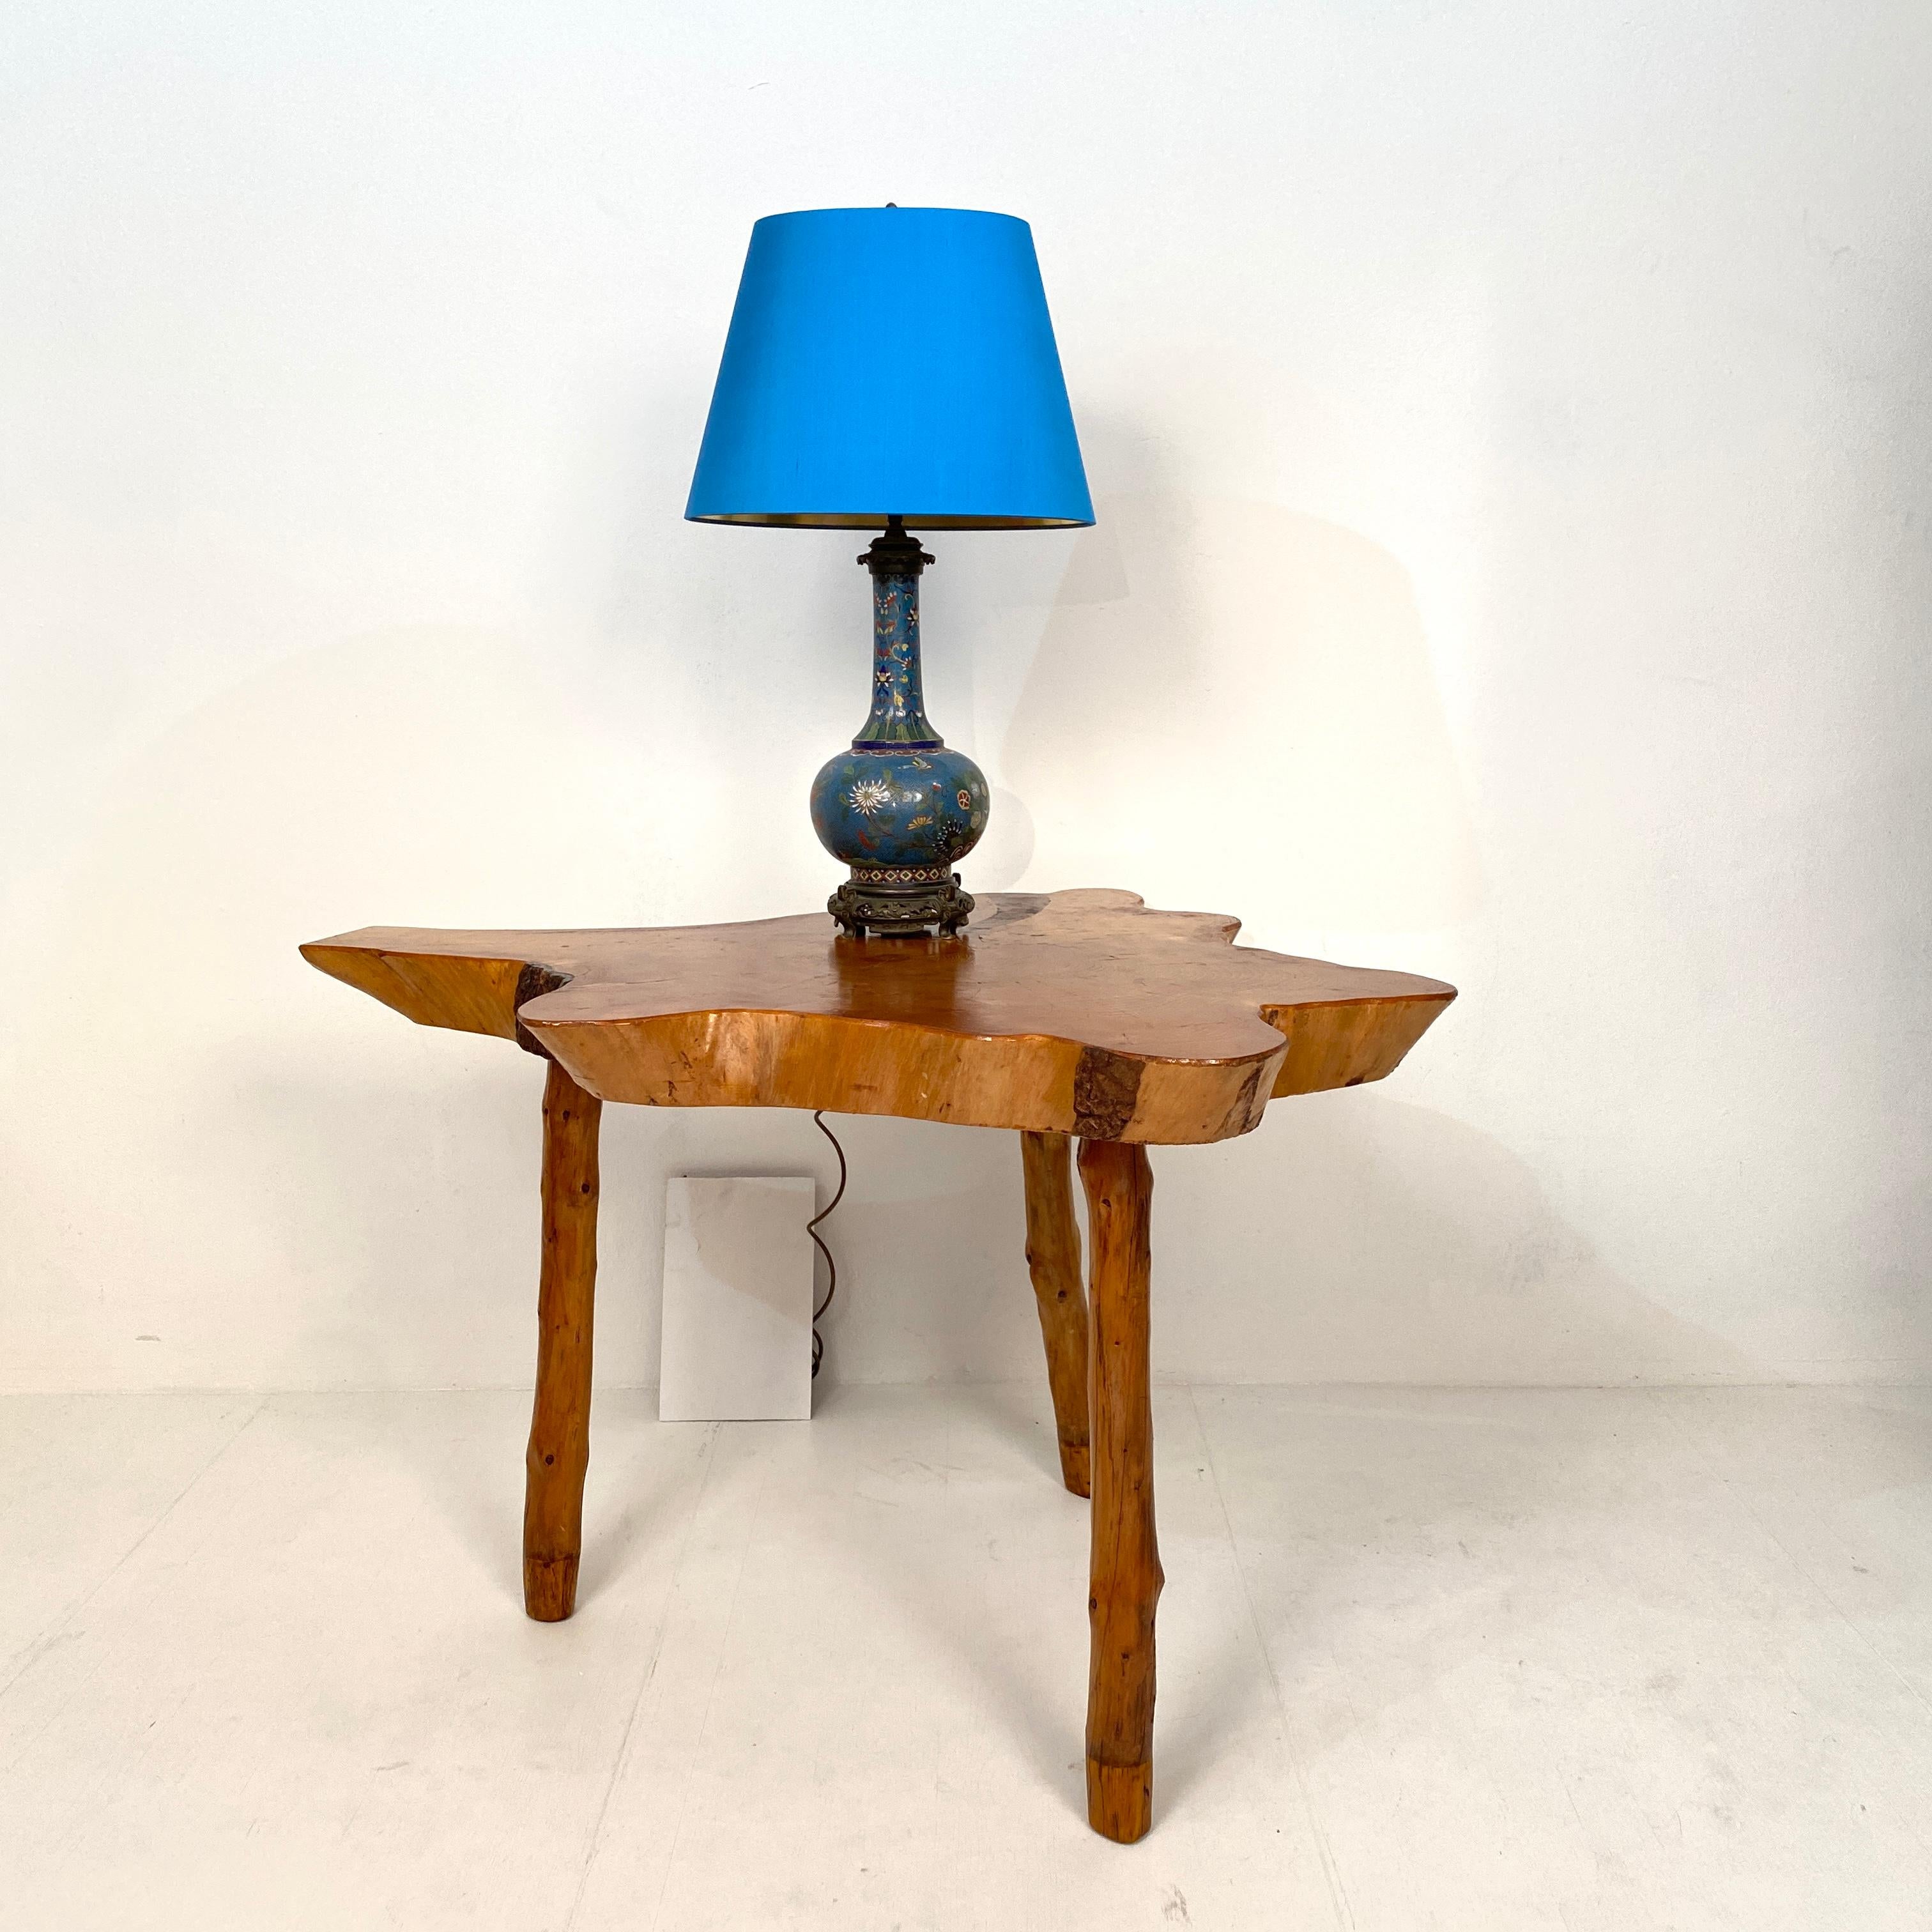 Swedish 20th Century Scandinavian Tree Trunk Centre Table, Writing Desk or Dining Table